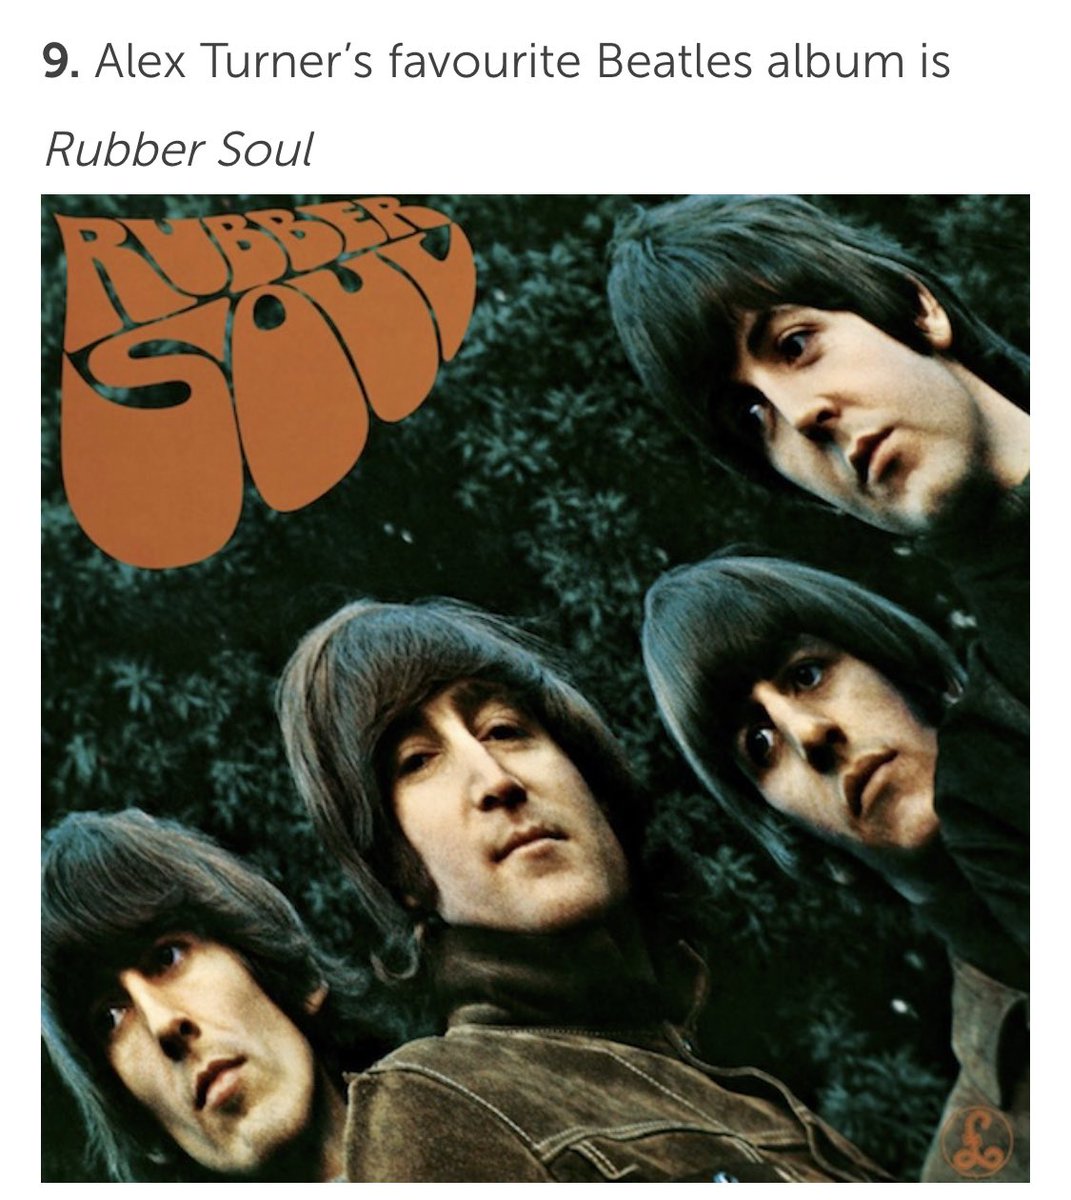 + i don’t know when alex said this but apparently rubber soul is his favorite beatles album and i remember reading somewhere that it’s his favorite album of all time. i’m not 100% sure about this though